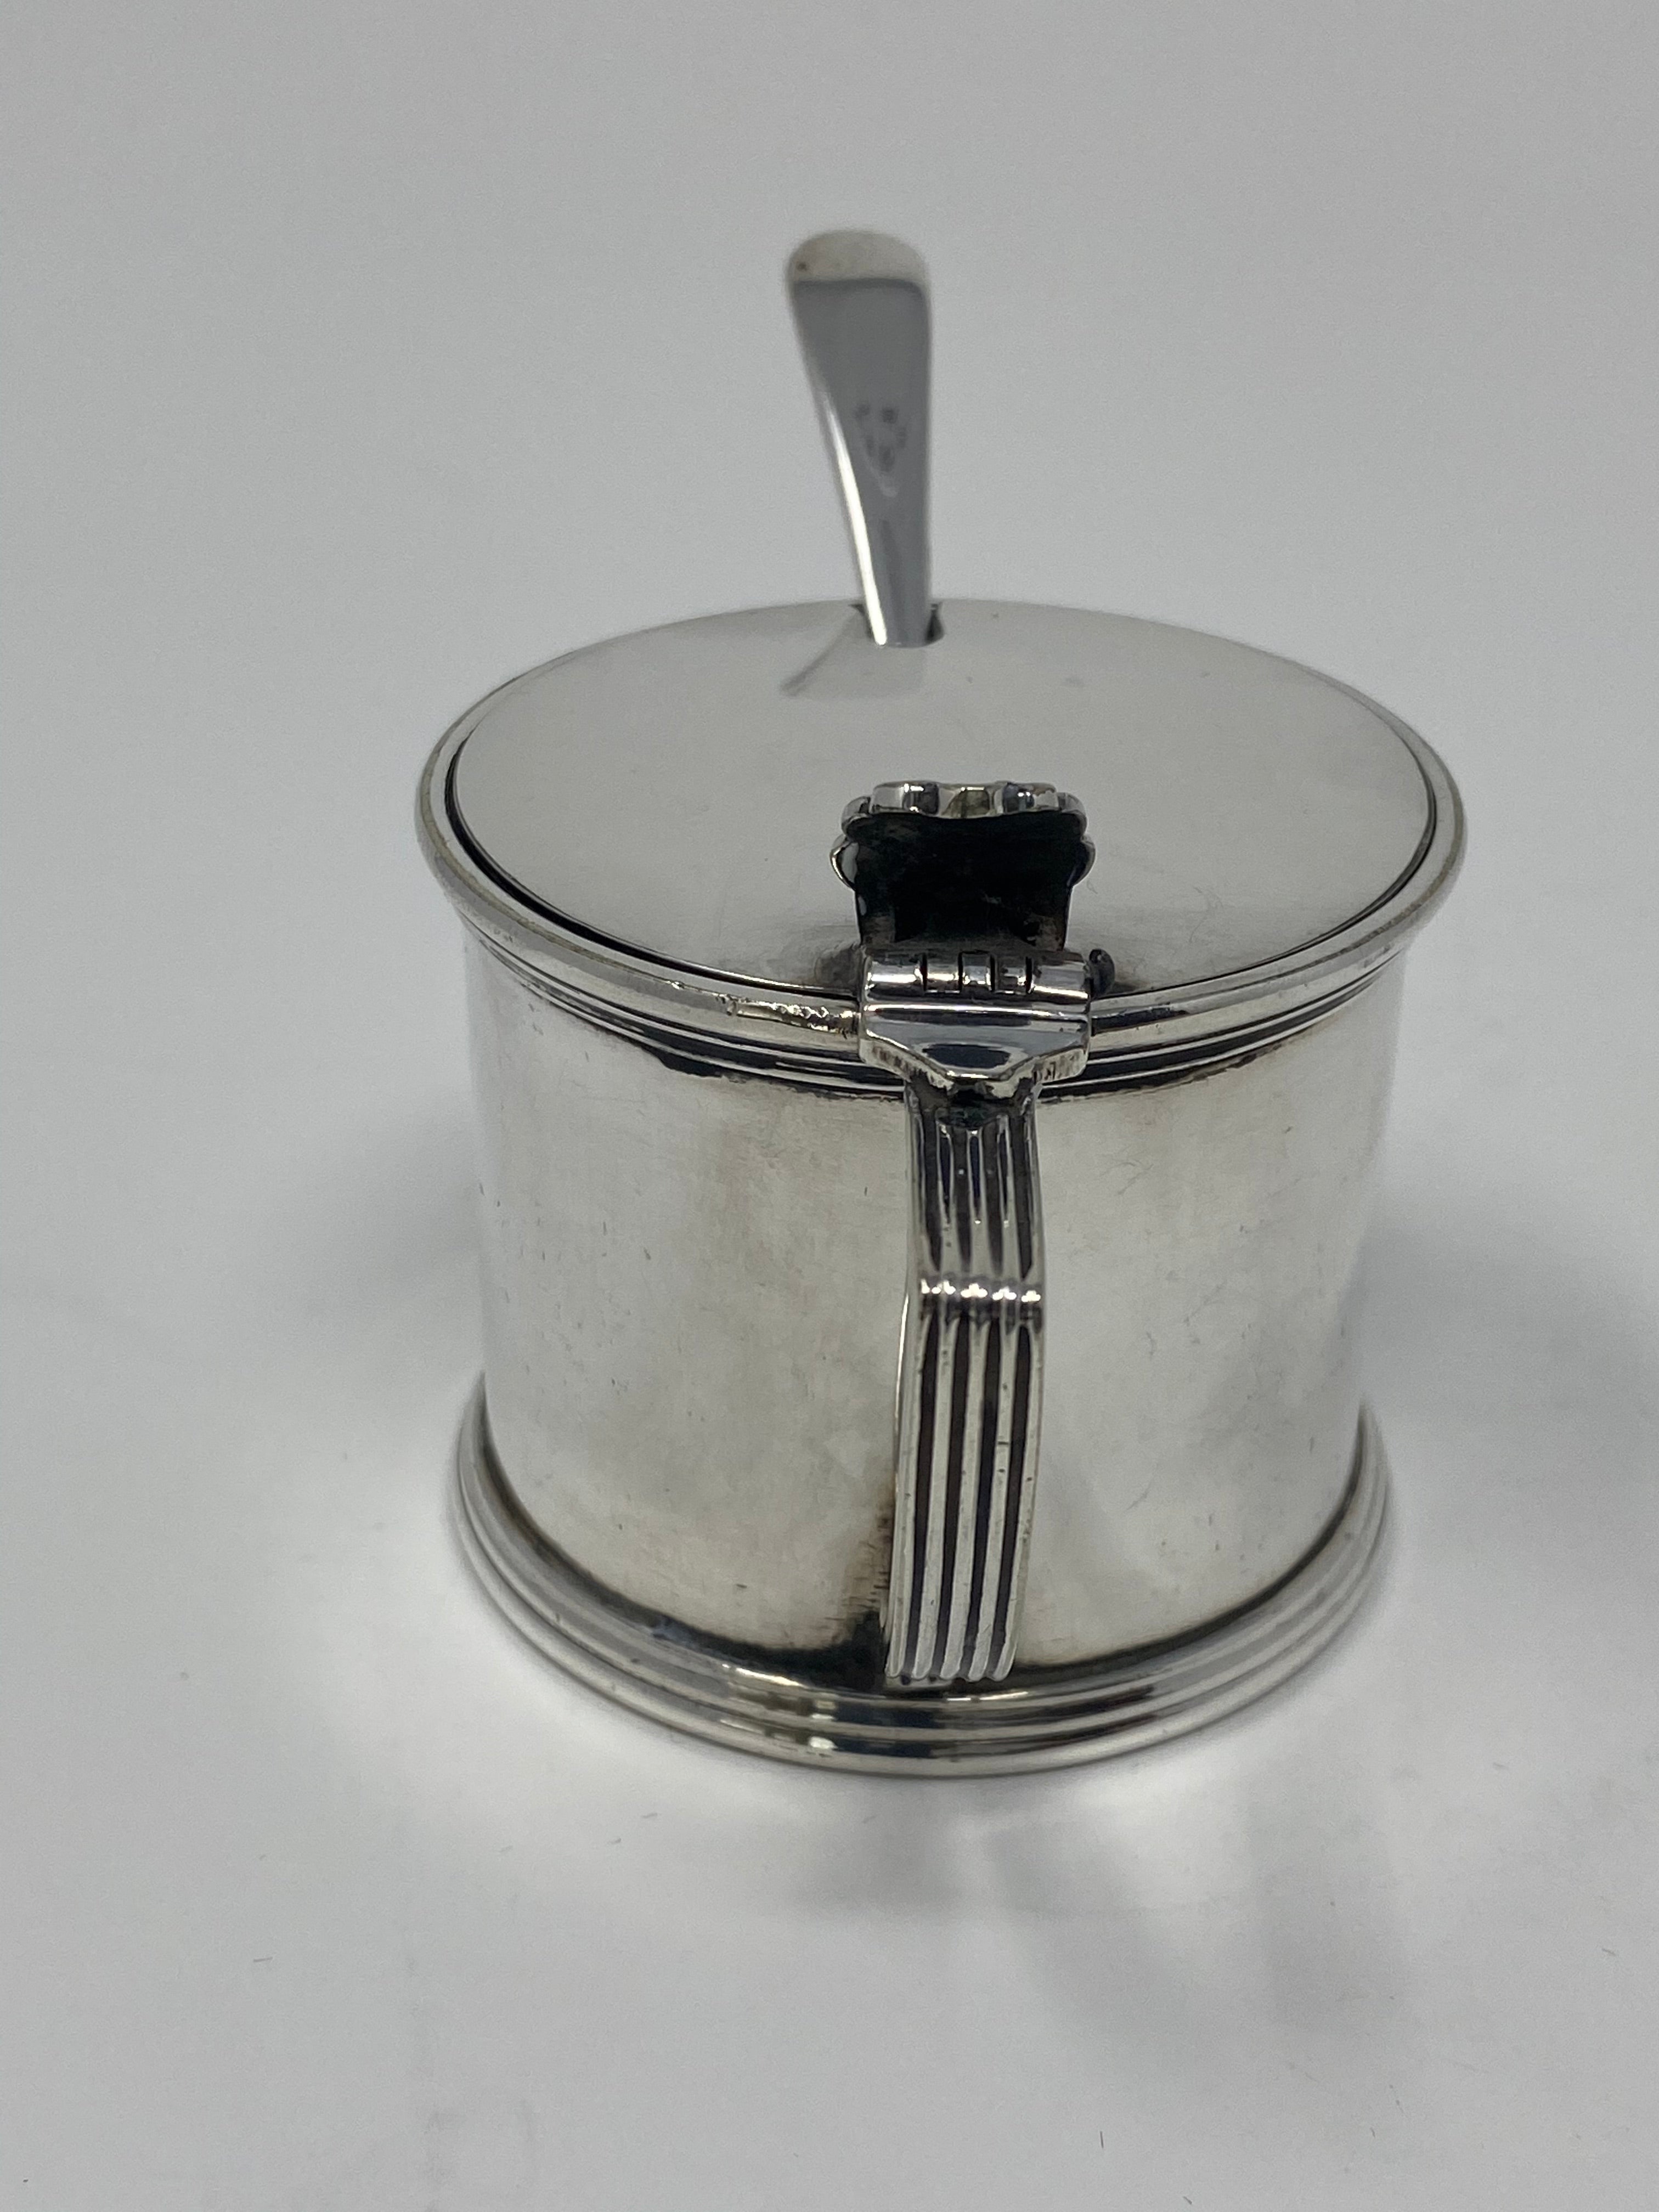 Silver Plated Mustard Pot With Blue Glass Liner and Spoon